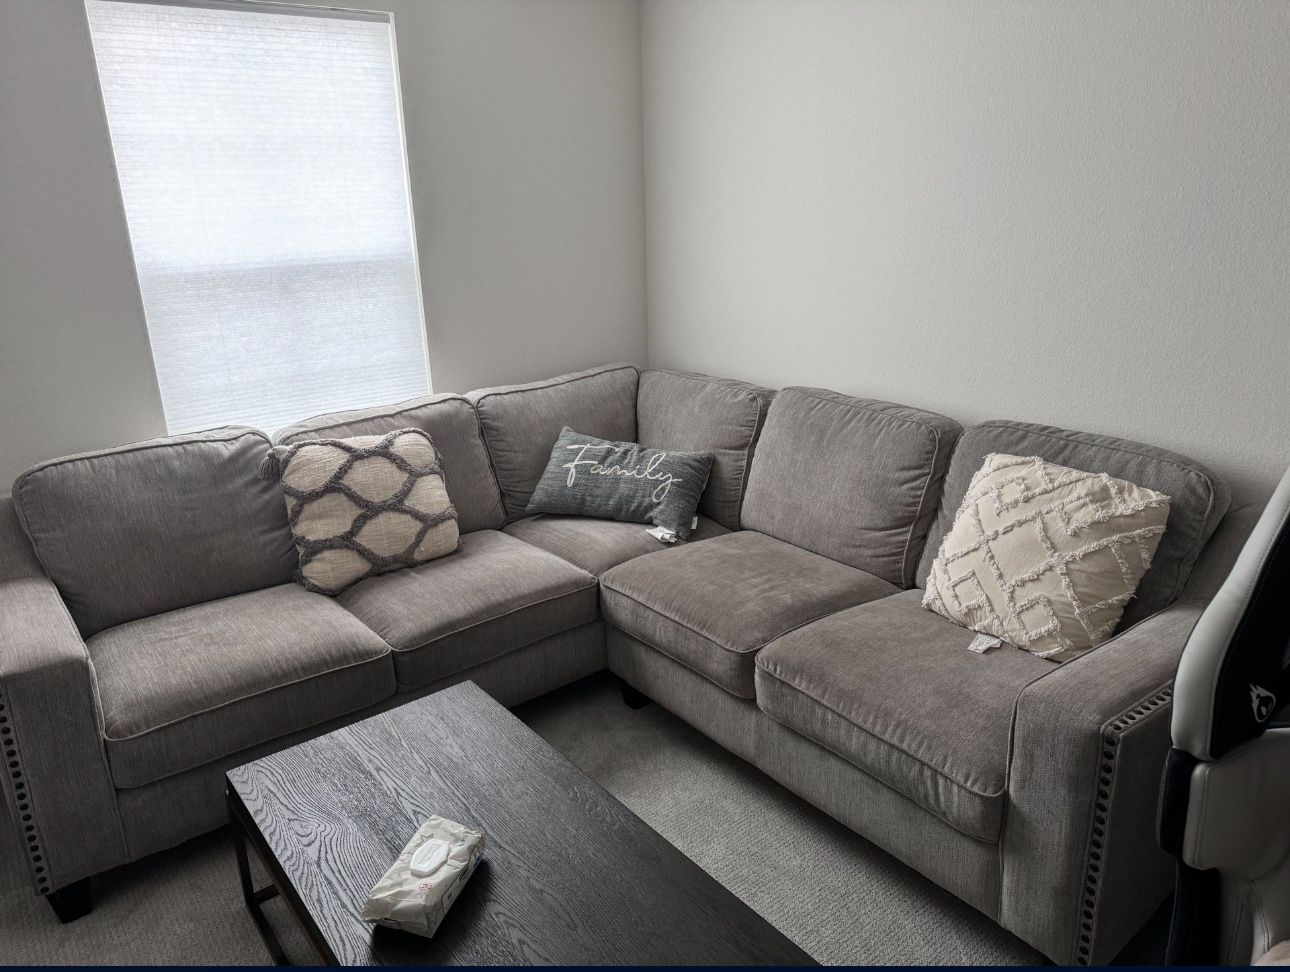 $550 for This Good Condition Sofa 